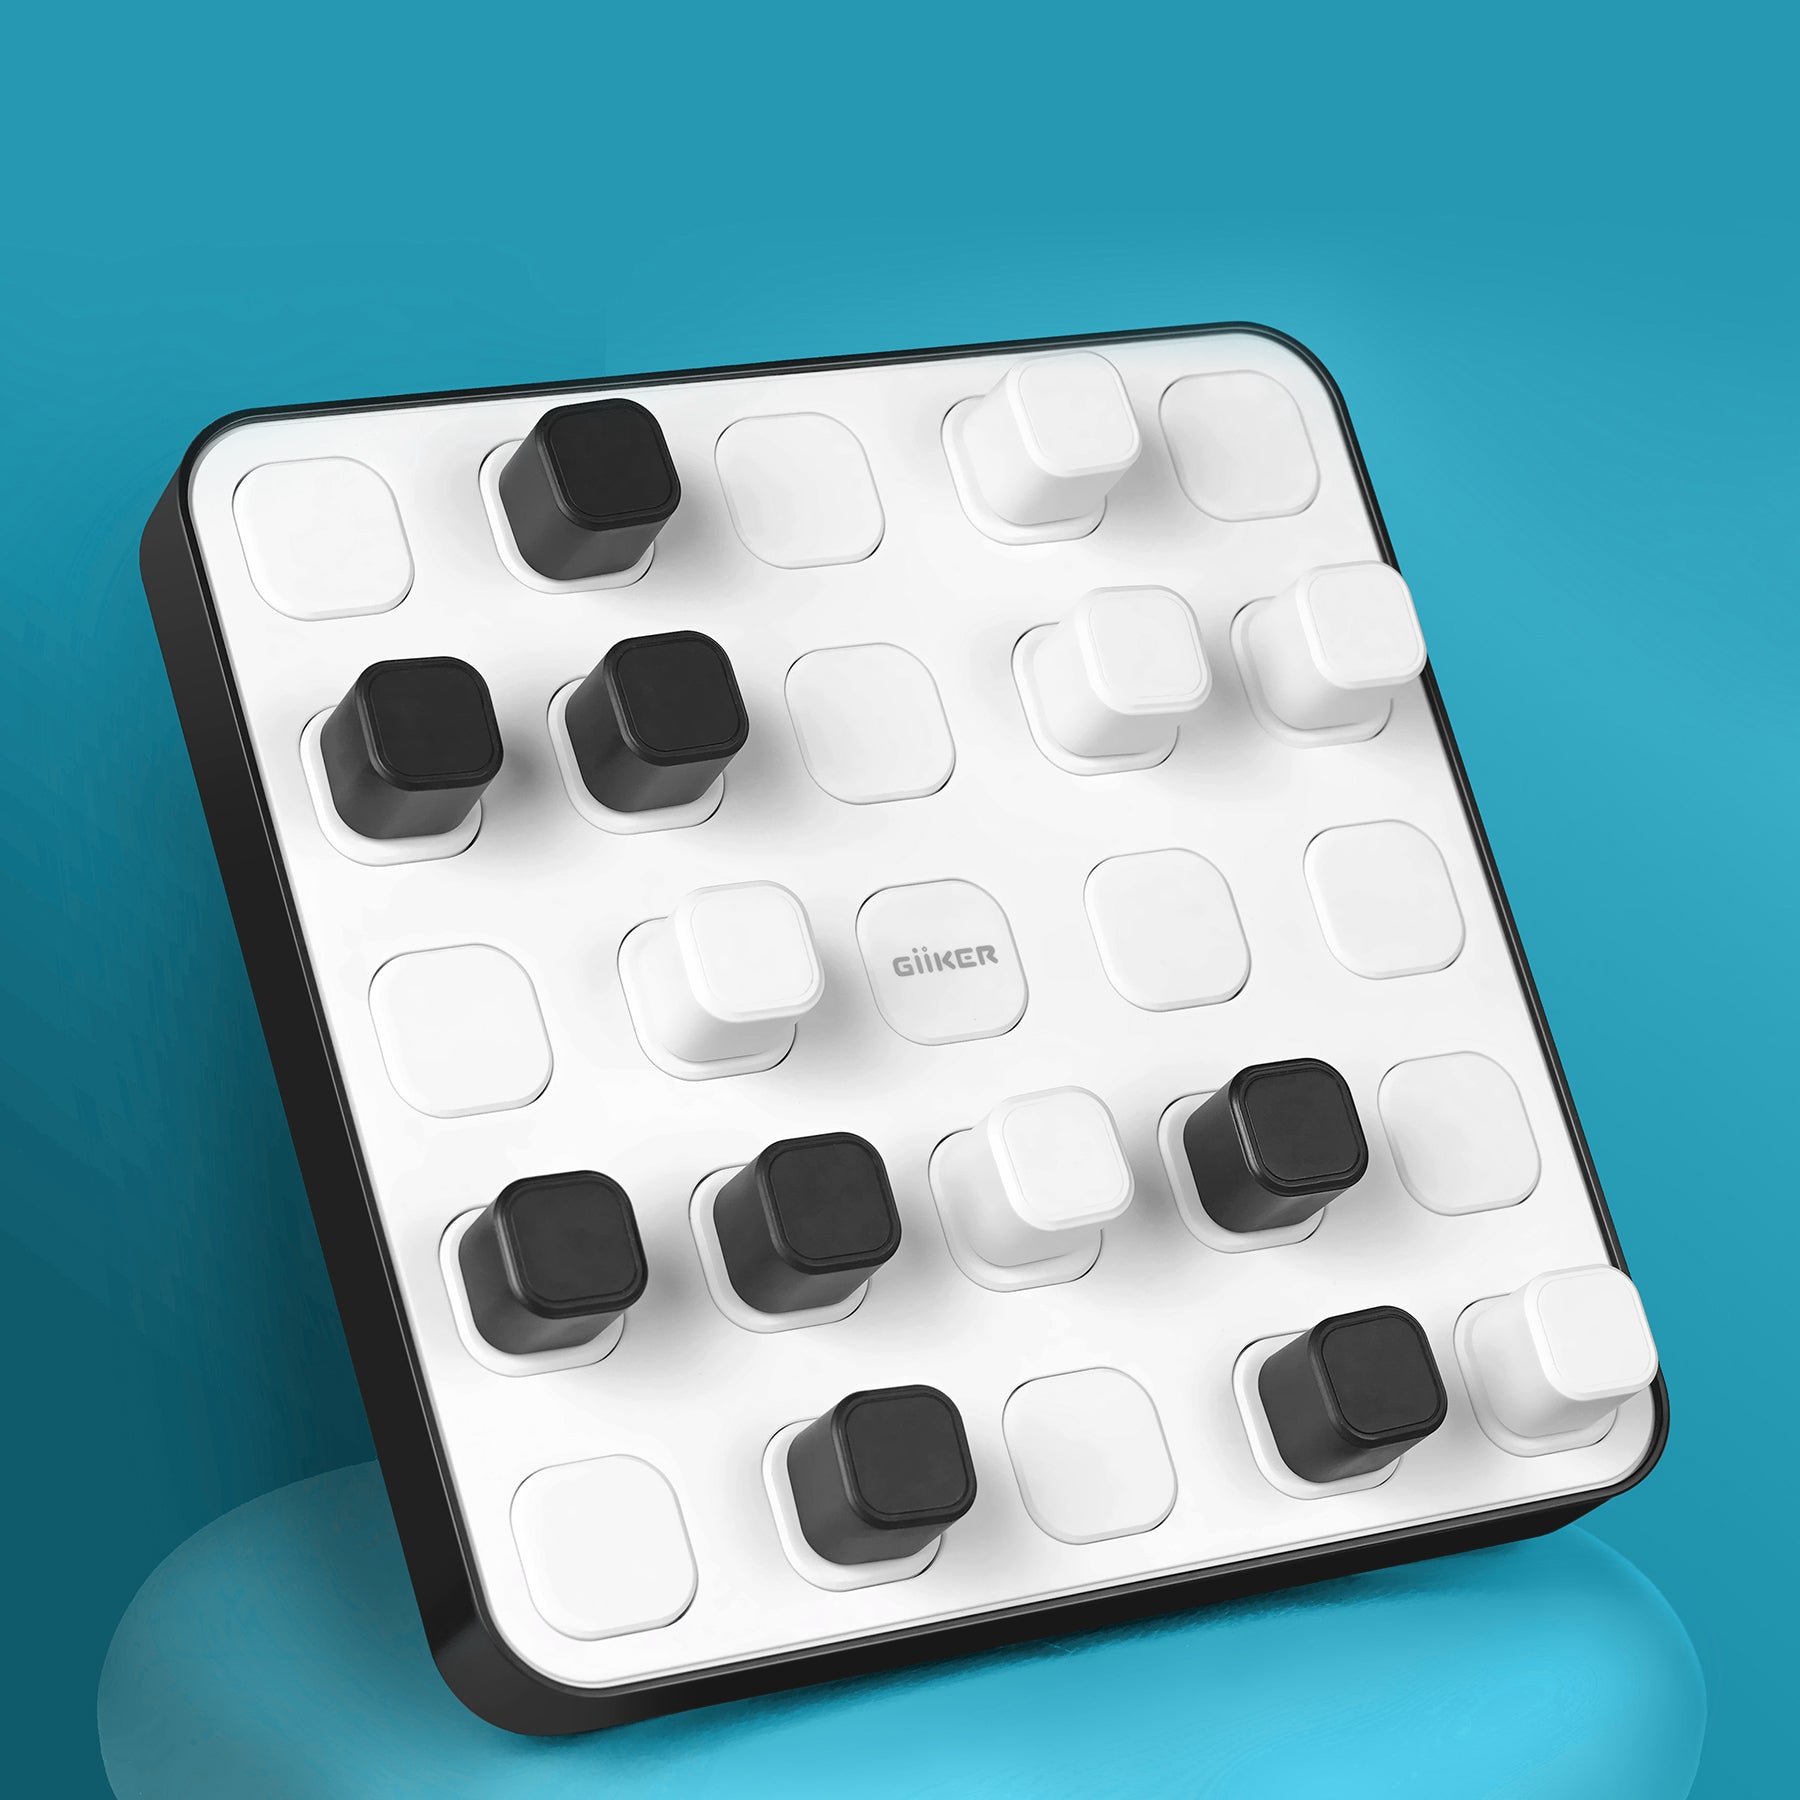 GiiKER Connected Smart Four Game, 3D Board Game, Magnetic Design in A Row  with AI Powered Strategic, App-Enabled Game Board with 